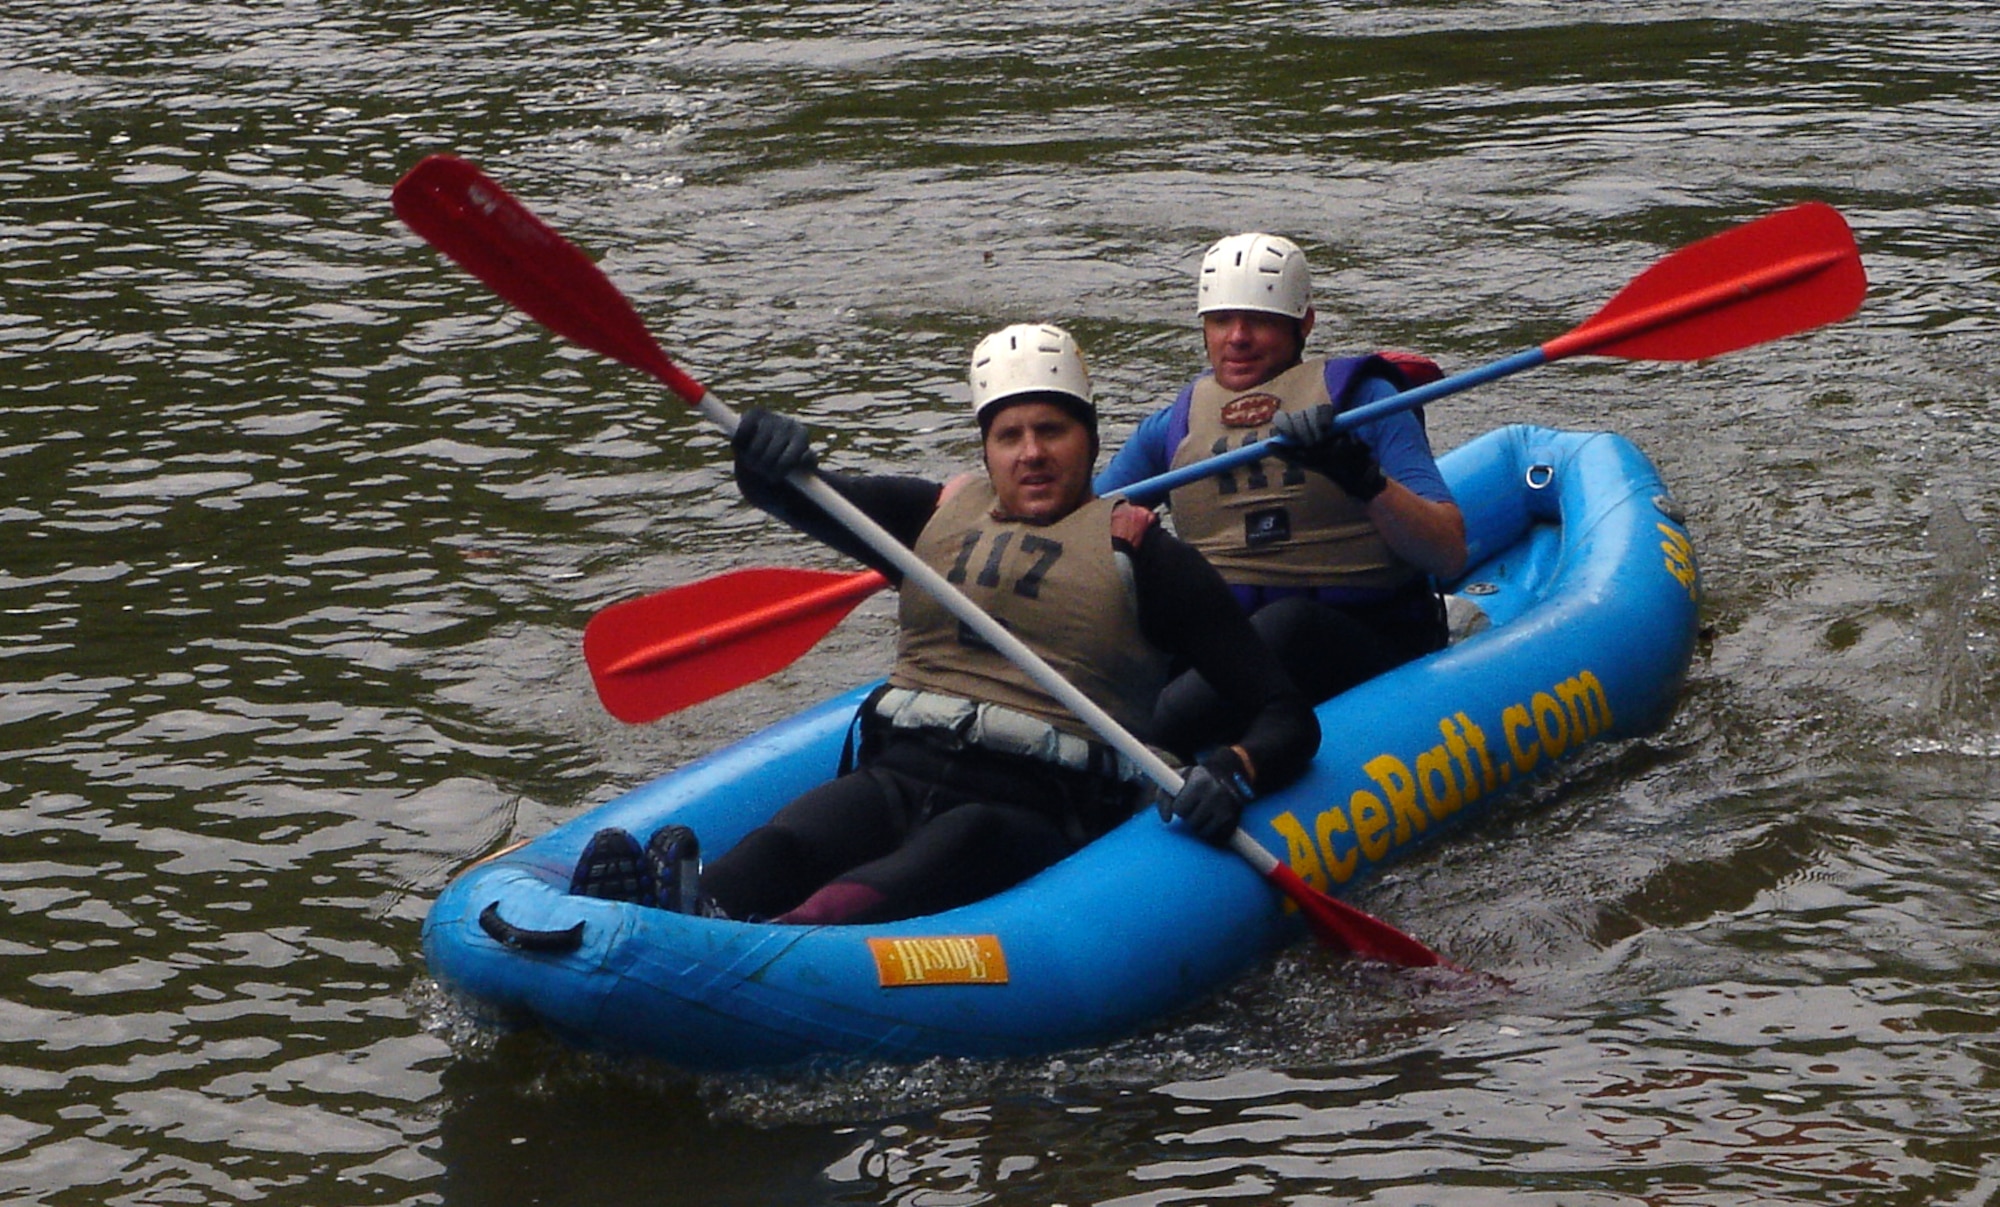 Dick Fulton and Mike Sonderman, members of the Defense Finance Accounting Service and 460th Comptroller Squadron Wilderness Challenge team, DFASt, paddle in after completing the two-person kayak event. The team competed against 50 military teams in six events that totaled 53 miles Oct. 6 and 7 and won first out of five Air Force teams and 16th out of 51 total teams.                             